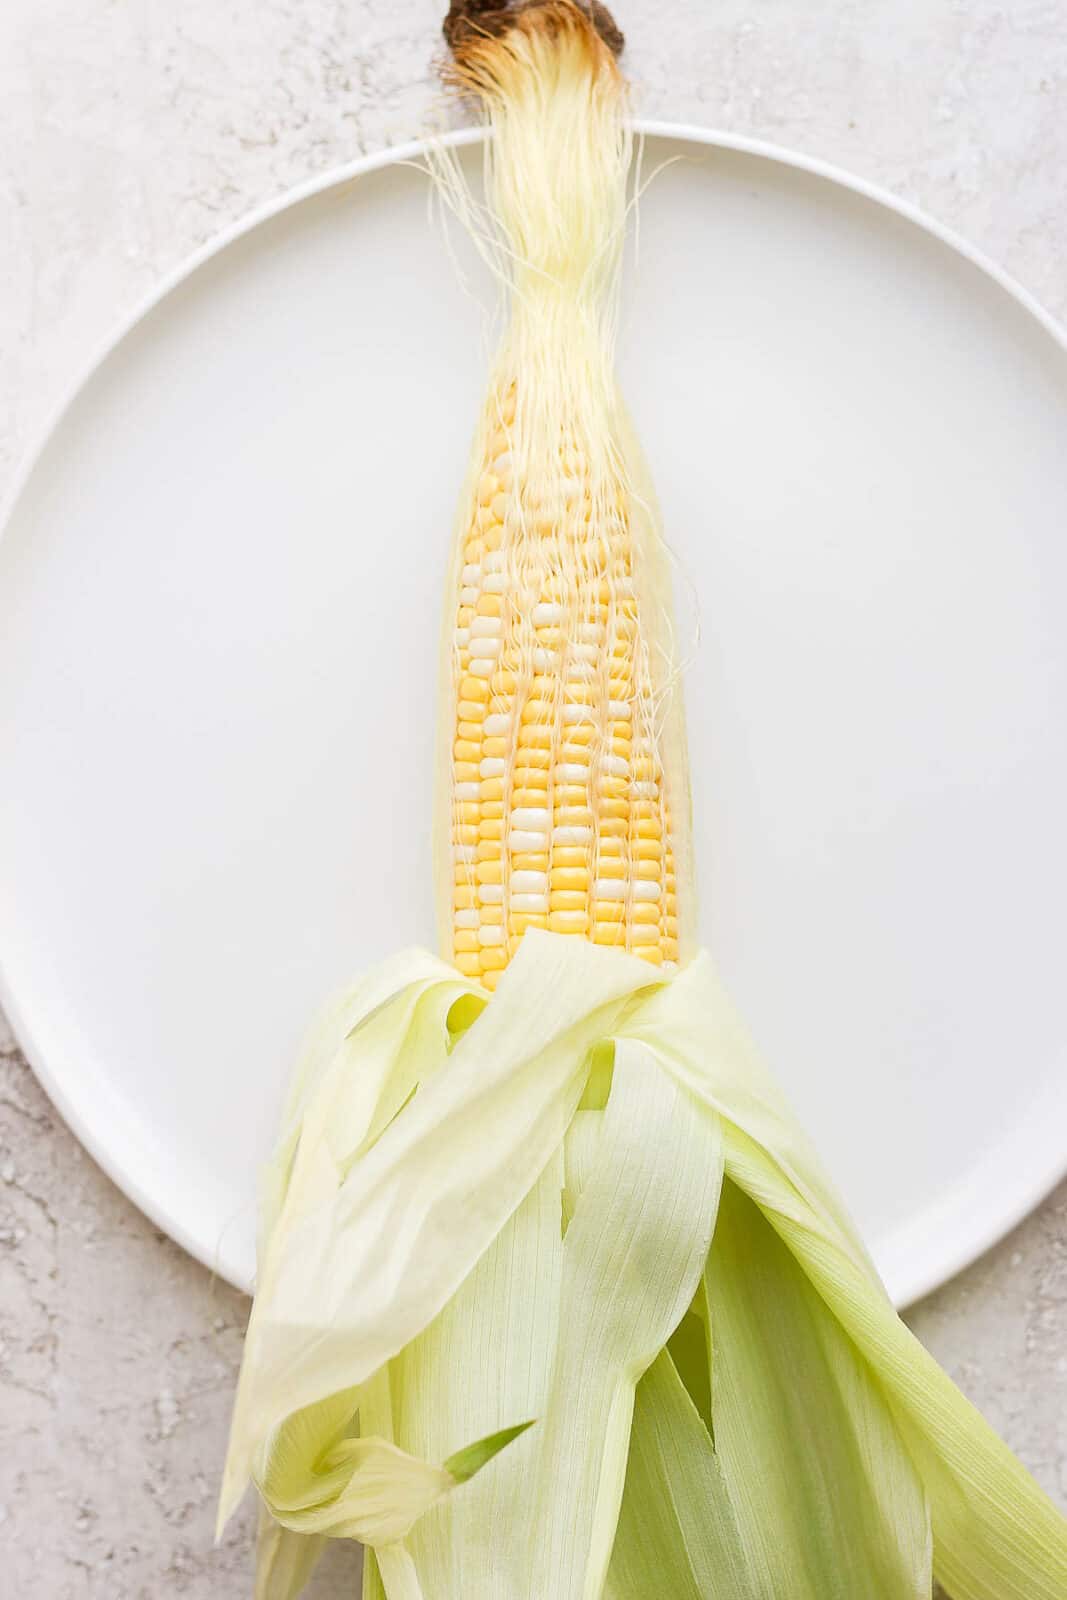 One piece of sweet corn on a plate with husk removed.